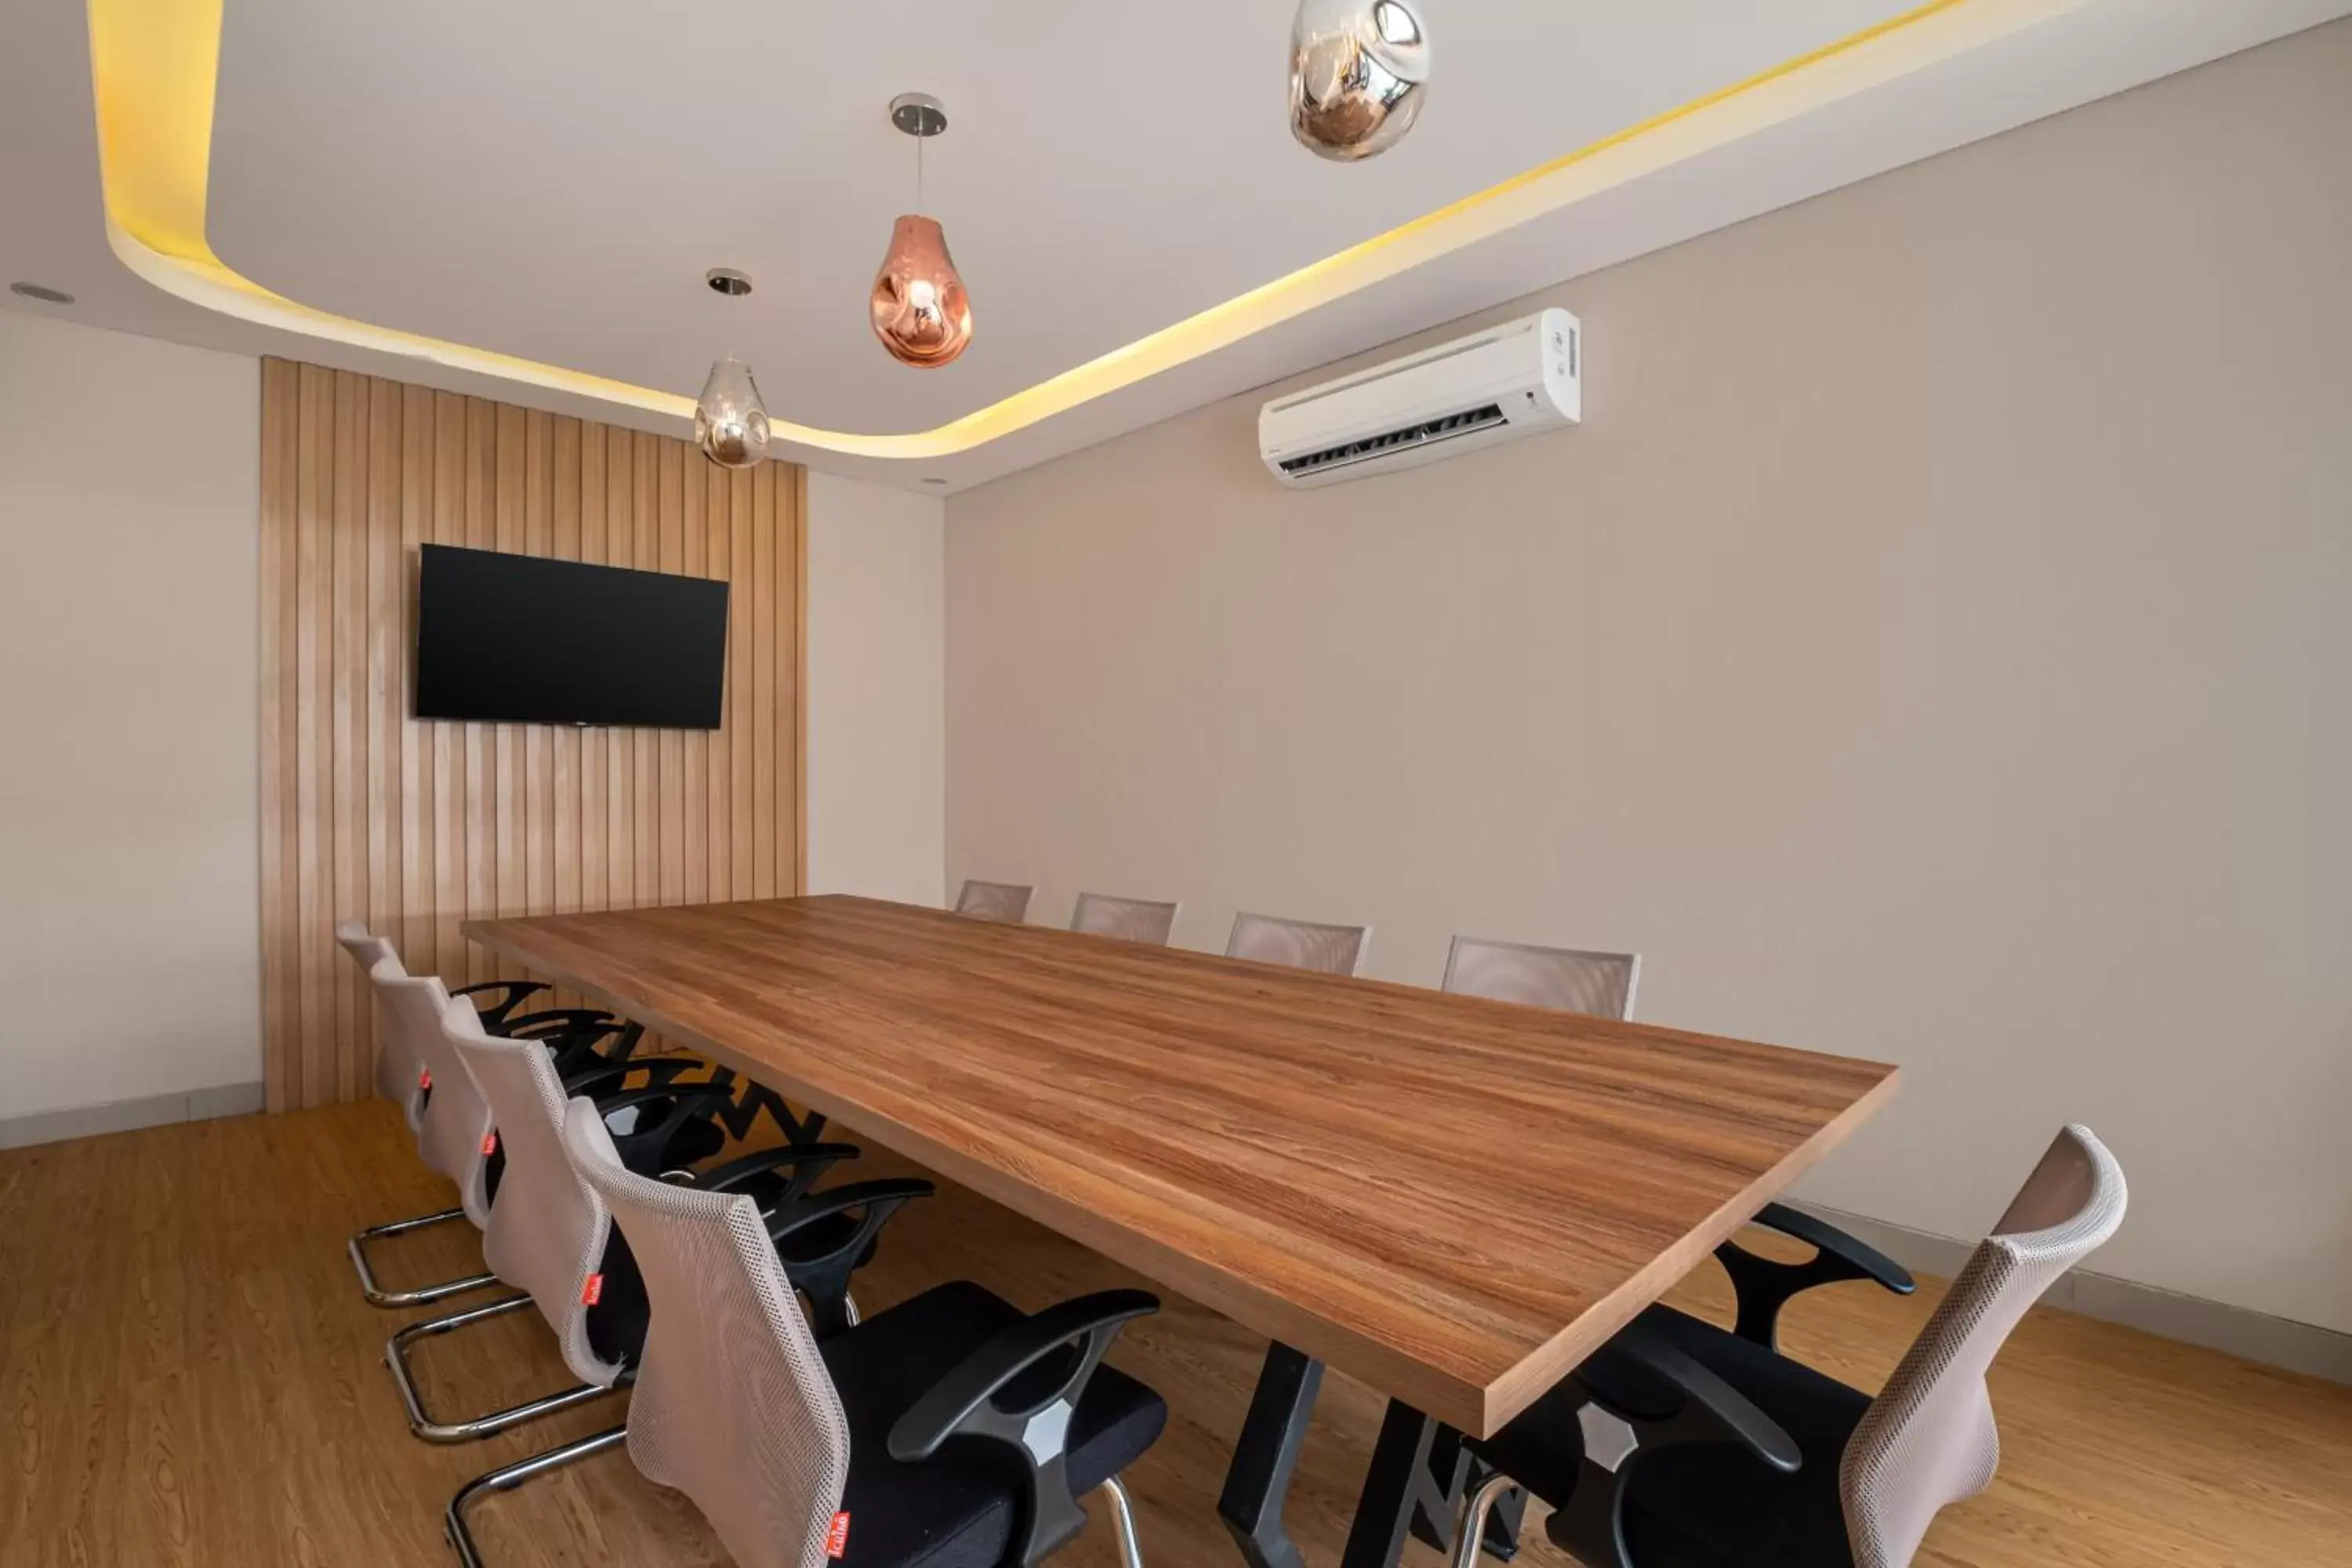 Meeting/conference room in ABISHA Hotel Sanur